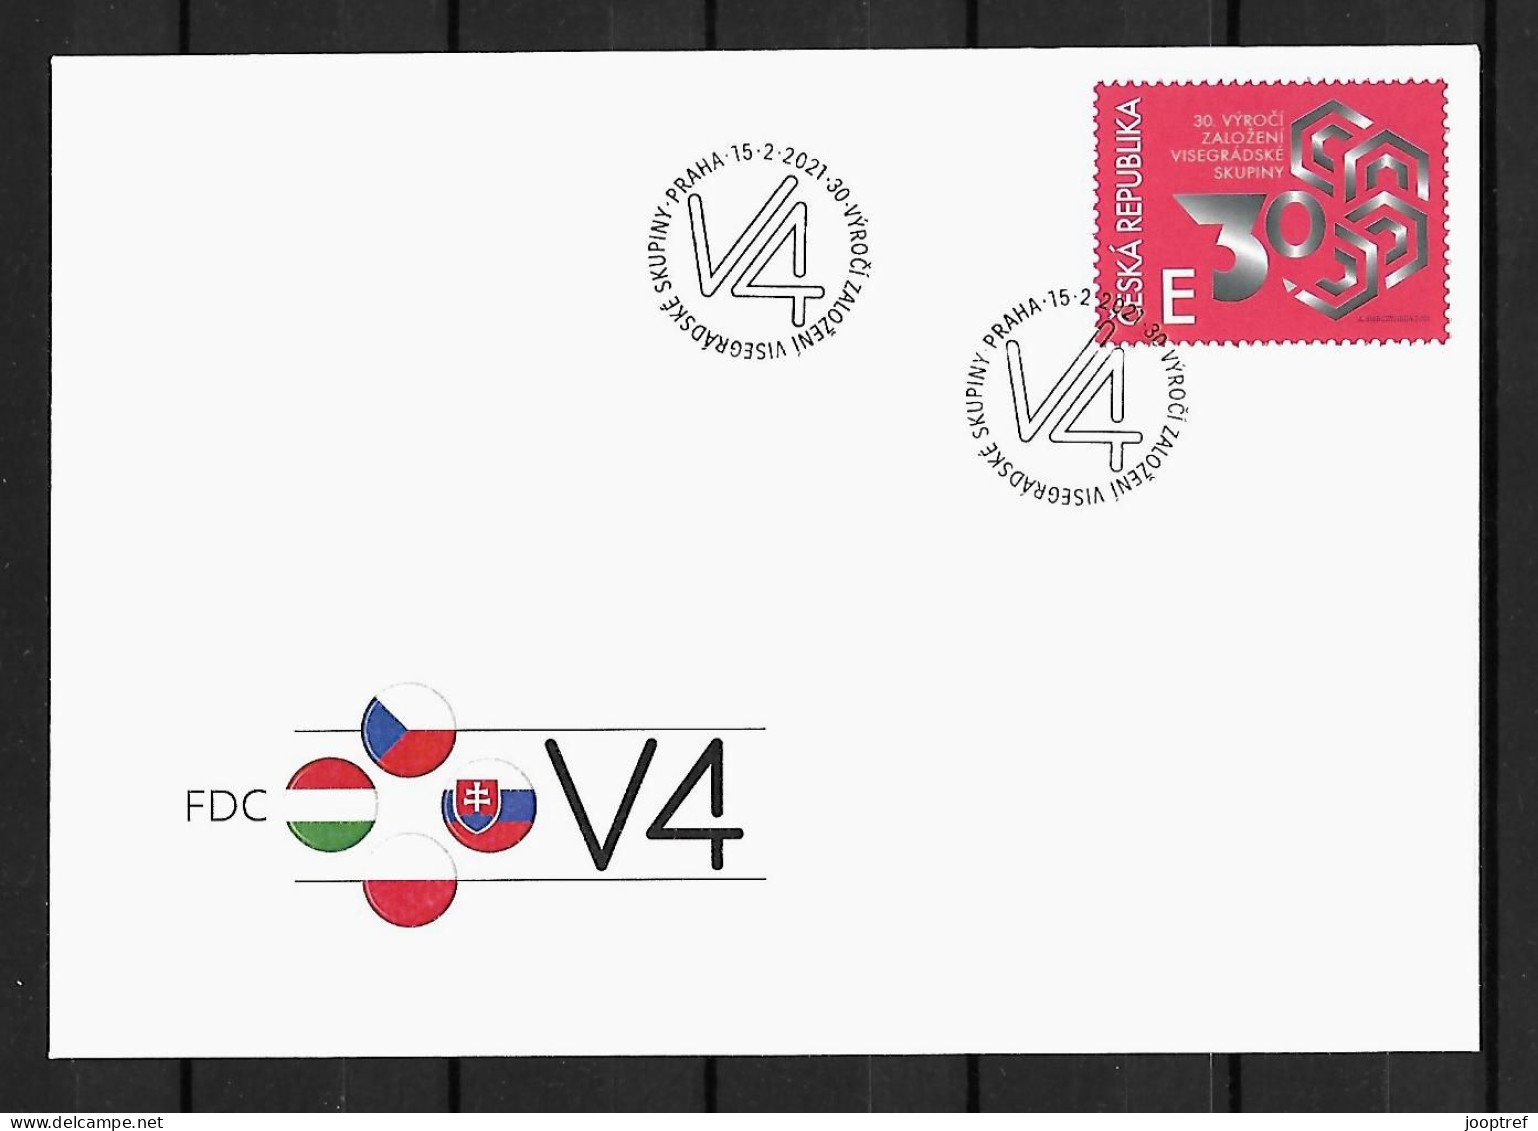 2021 Joint Czech Republic - Hungary - Poland - Slovakia, FDC CZECH REPUBLIC WITH 1 STAMP: Visegrad 30 Years - Emisiones Comunes